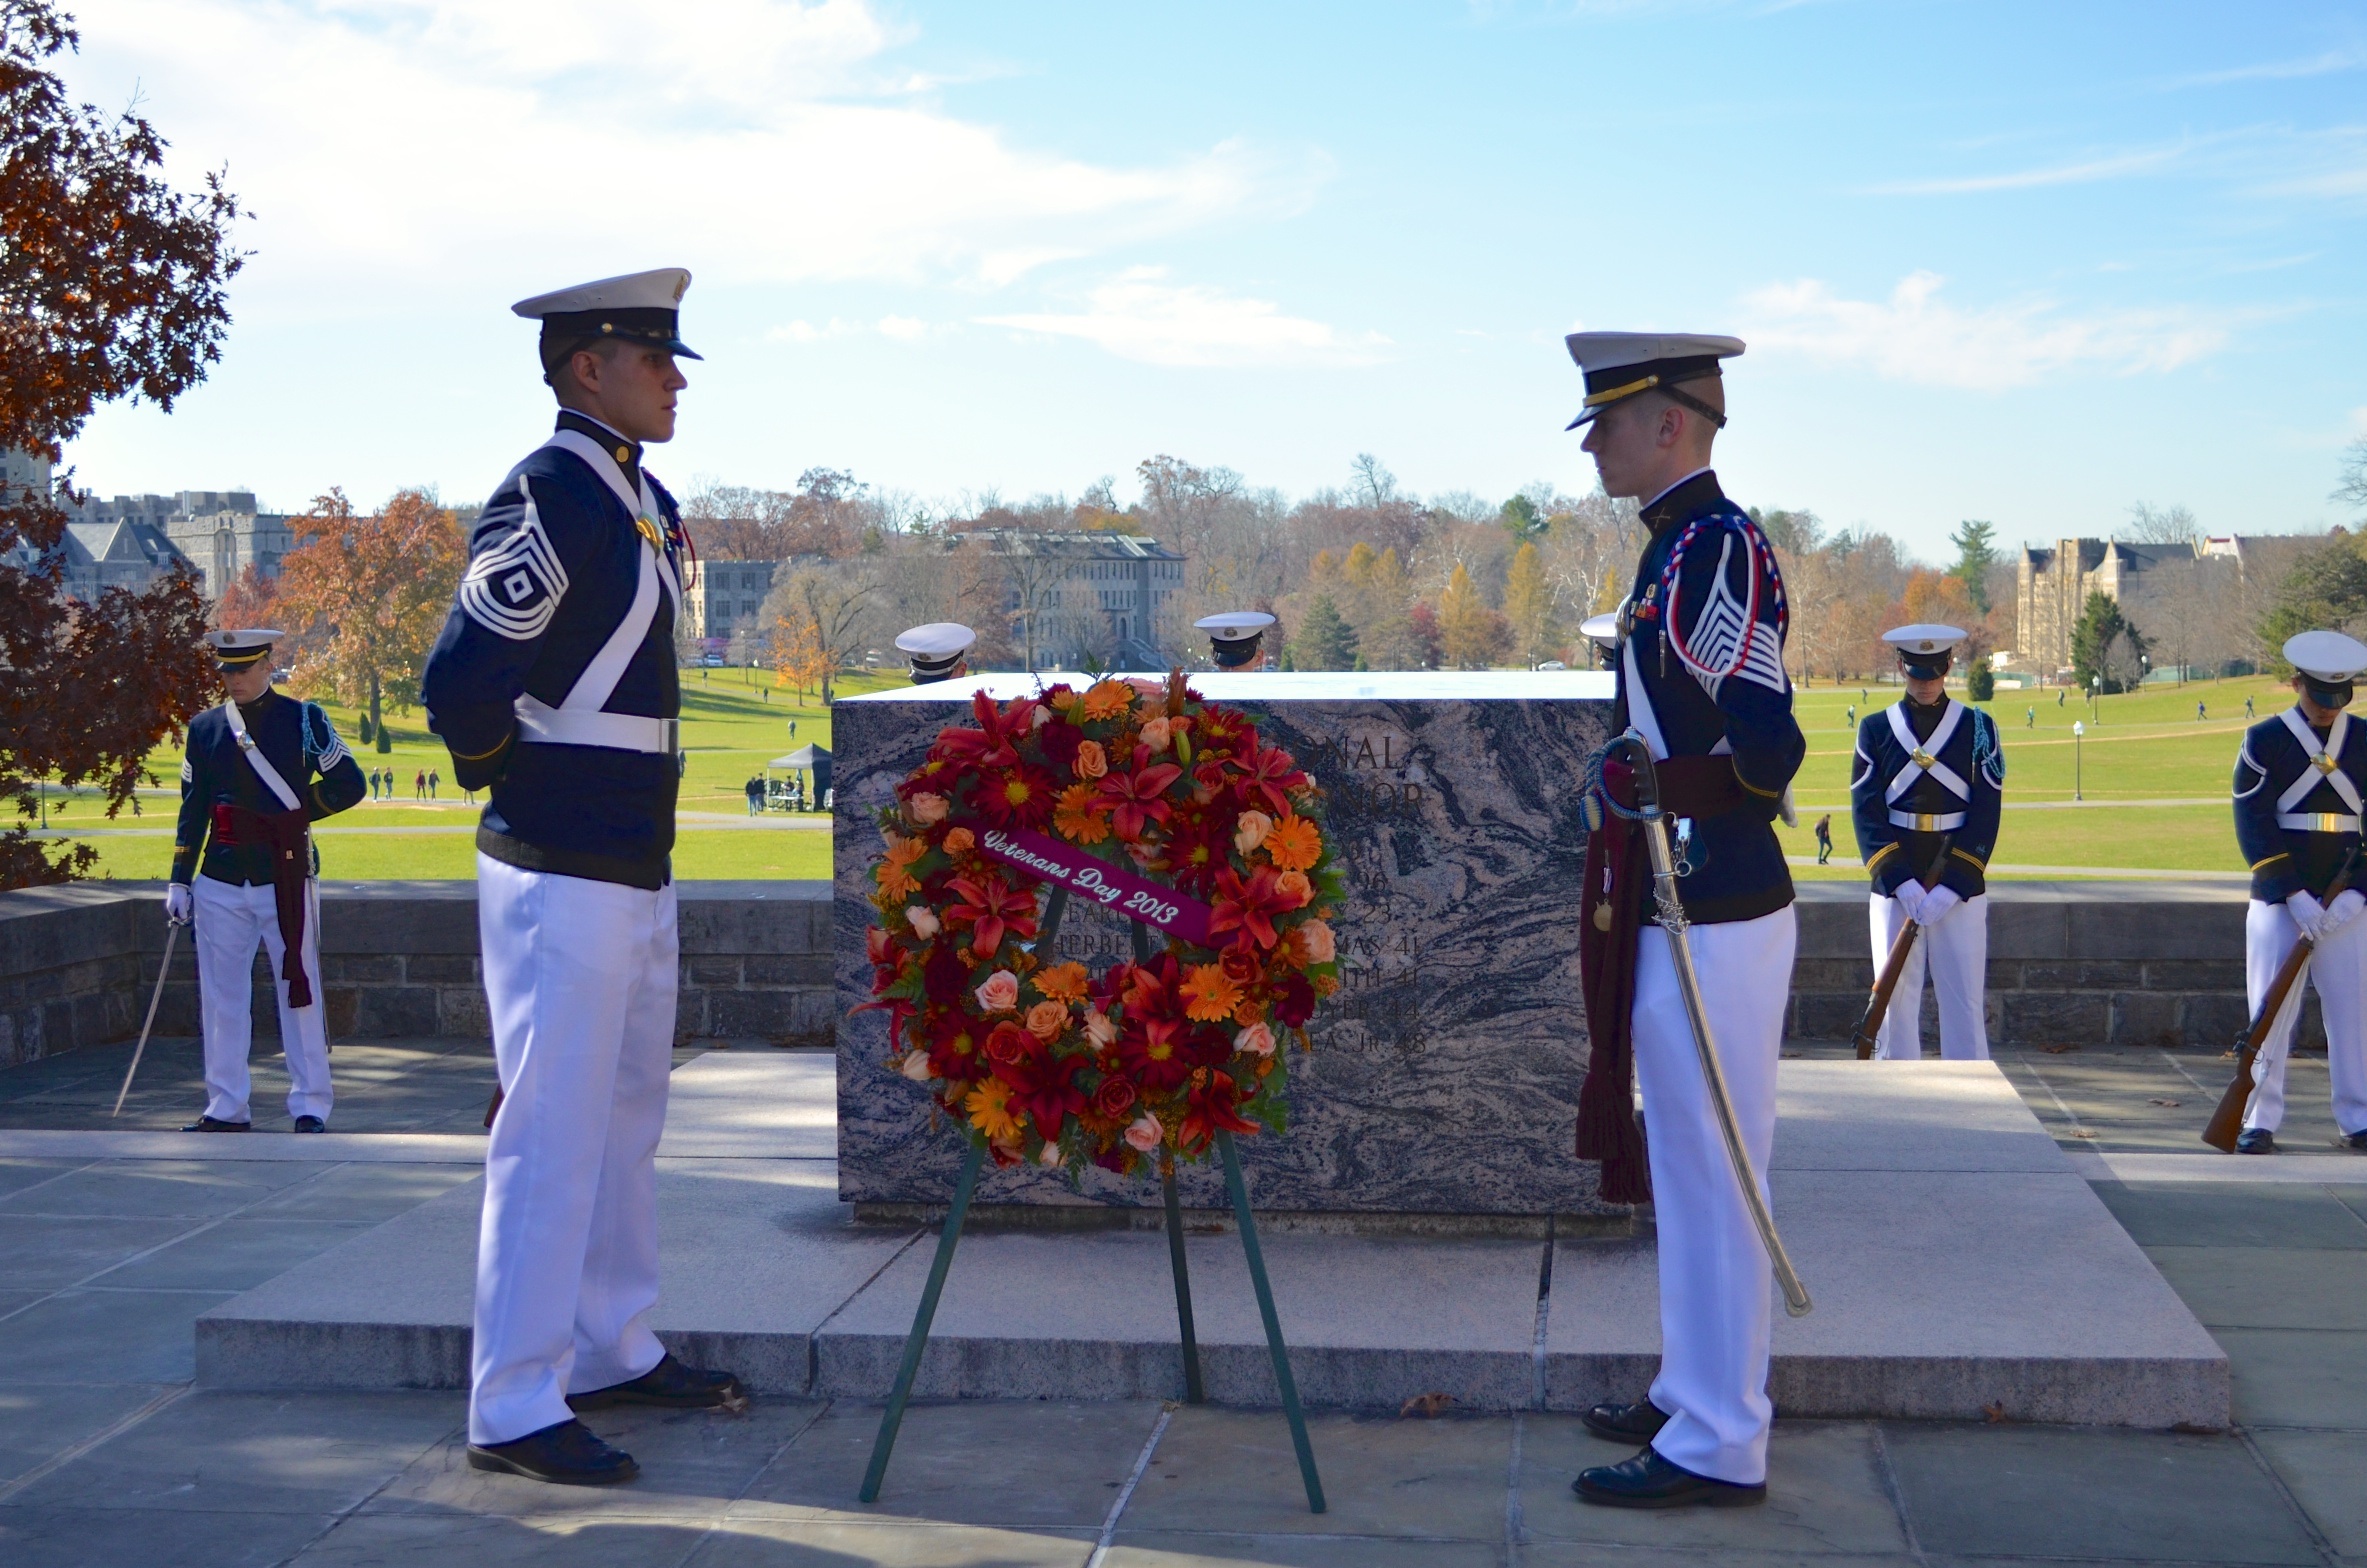 Presentation of the memorial wreath at Veterans Day Ceremony in November 2013 at the Pylons.